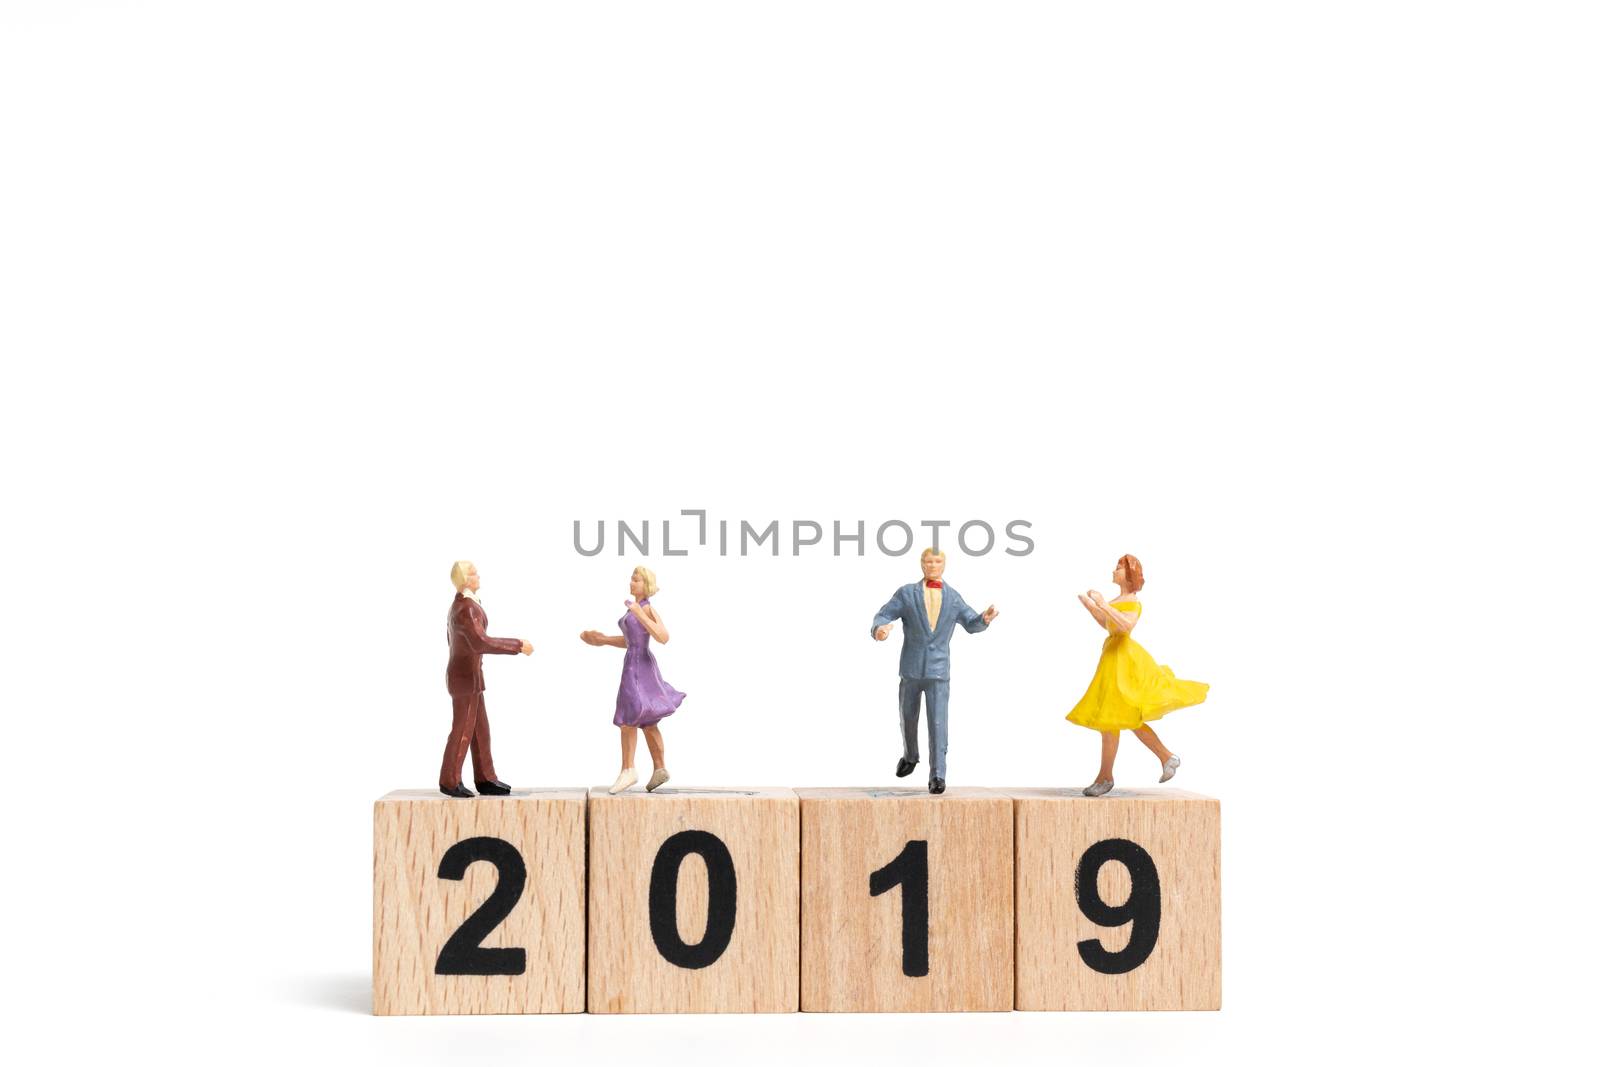 Miniature people dancing on wooden block number 2019. on white background